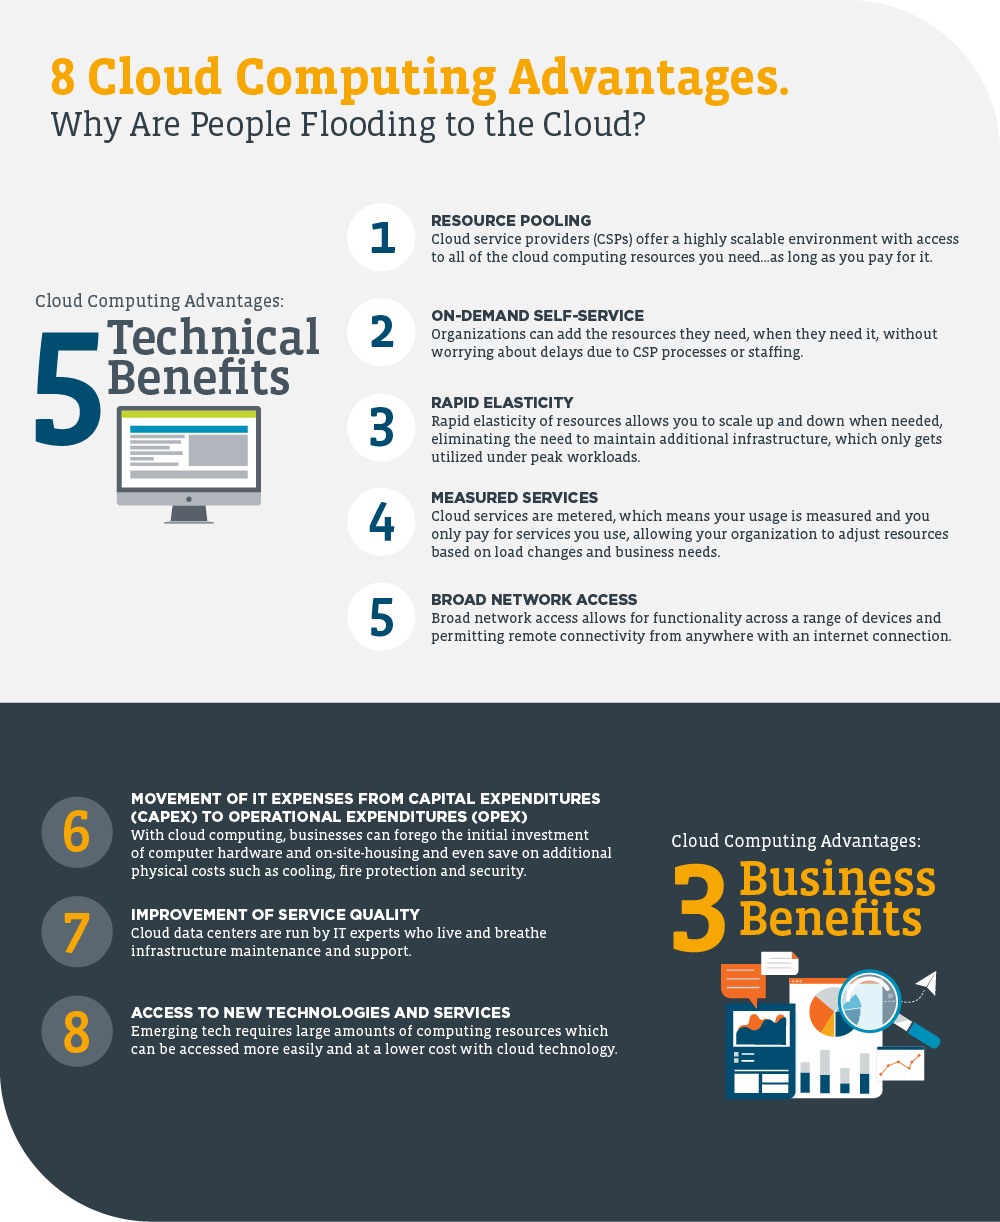 What Are Three Benefits Of Cloud Computing Choose Three? - Capa Learning